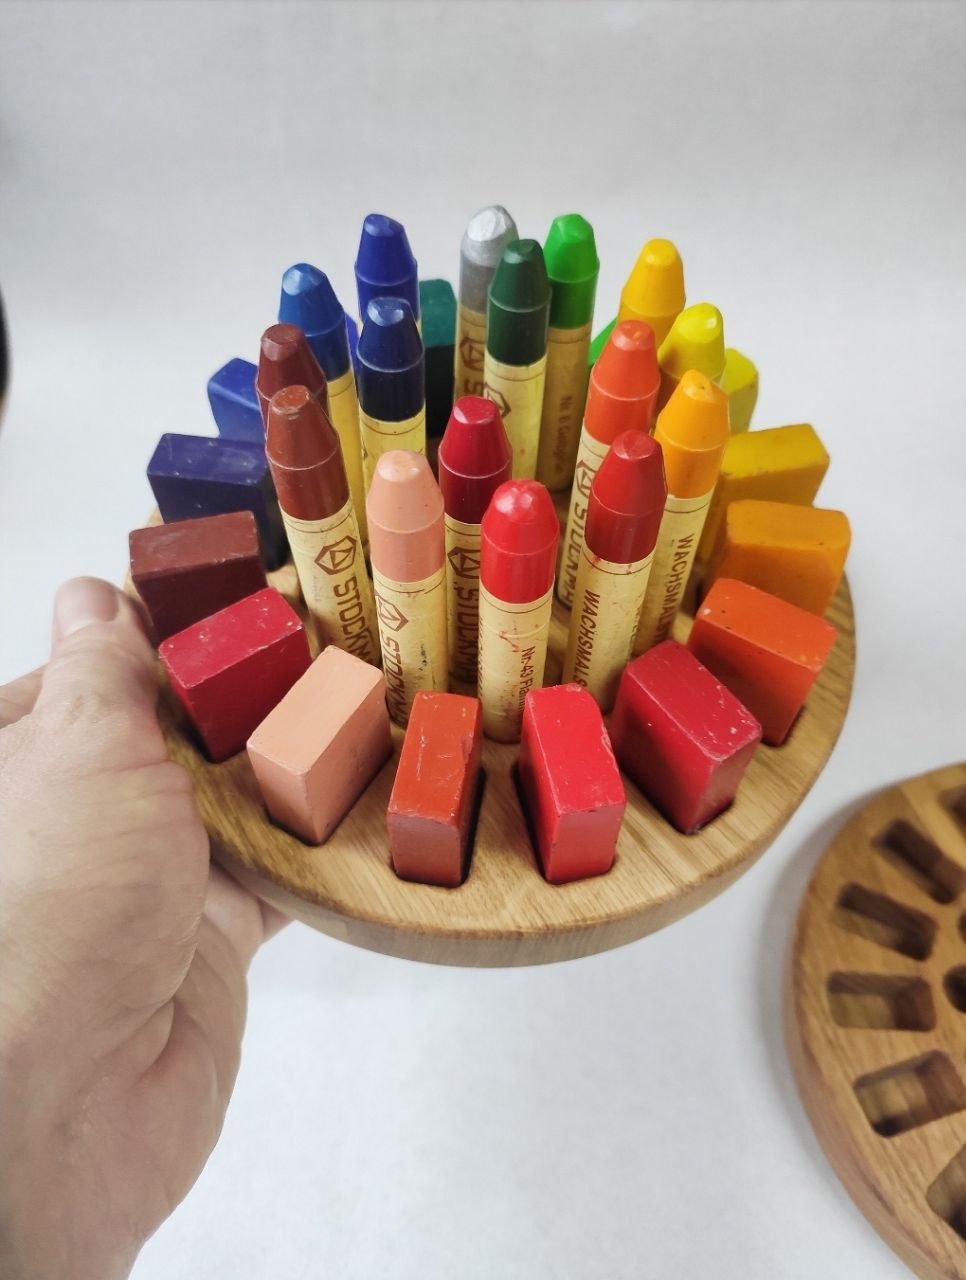 Waldorf Crayon holder for Stockmar 16 Blocks and 16 Sticks, ROUND without crayons